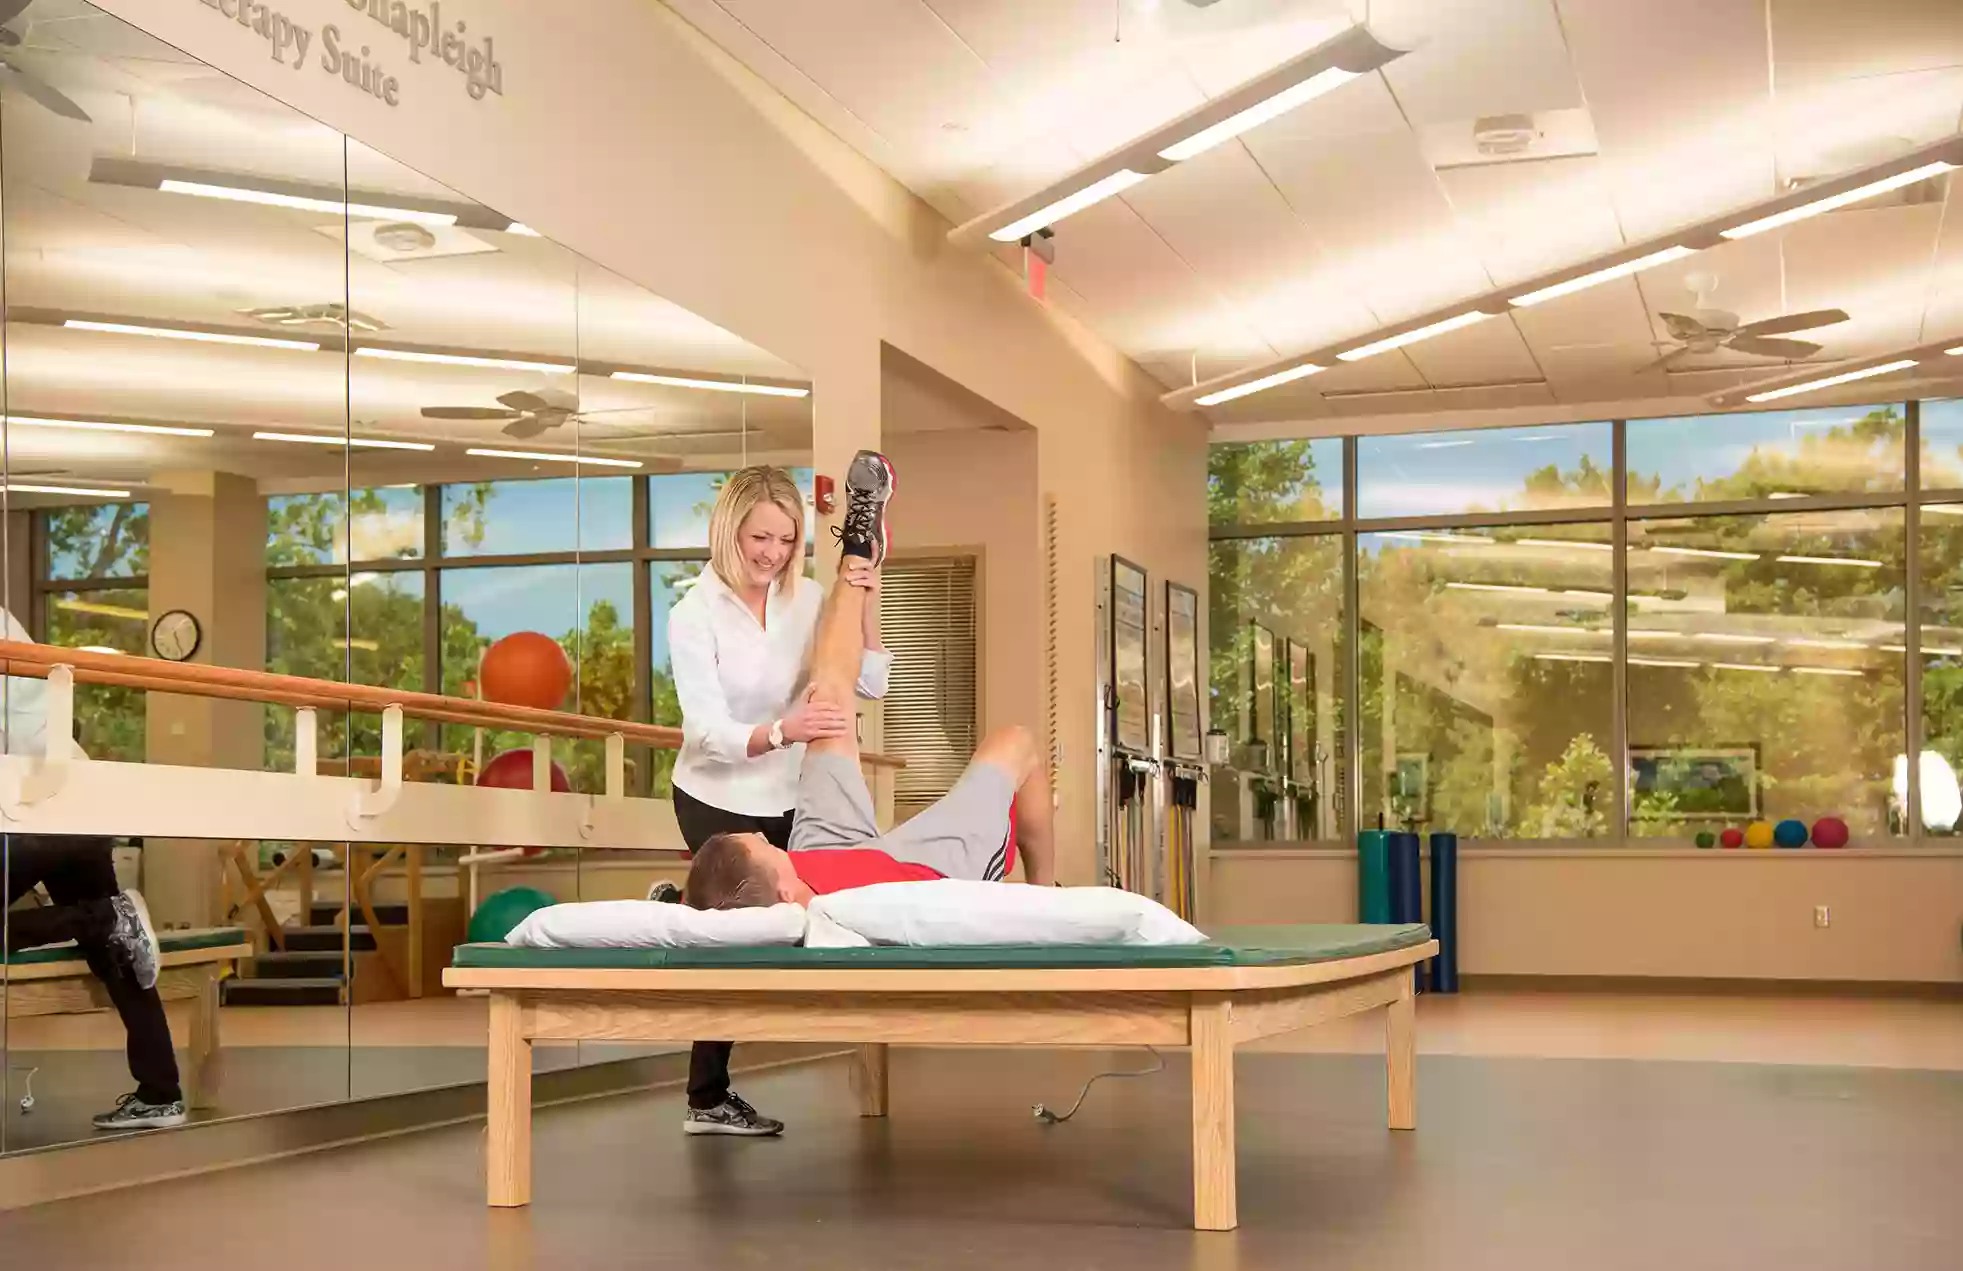 St. Luke's Physical Therapy at St. Peters